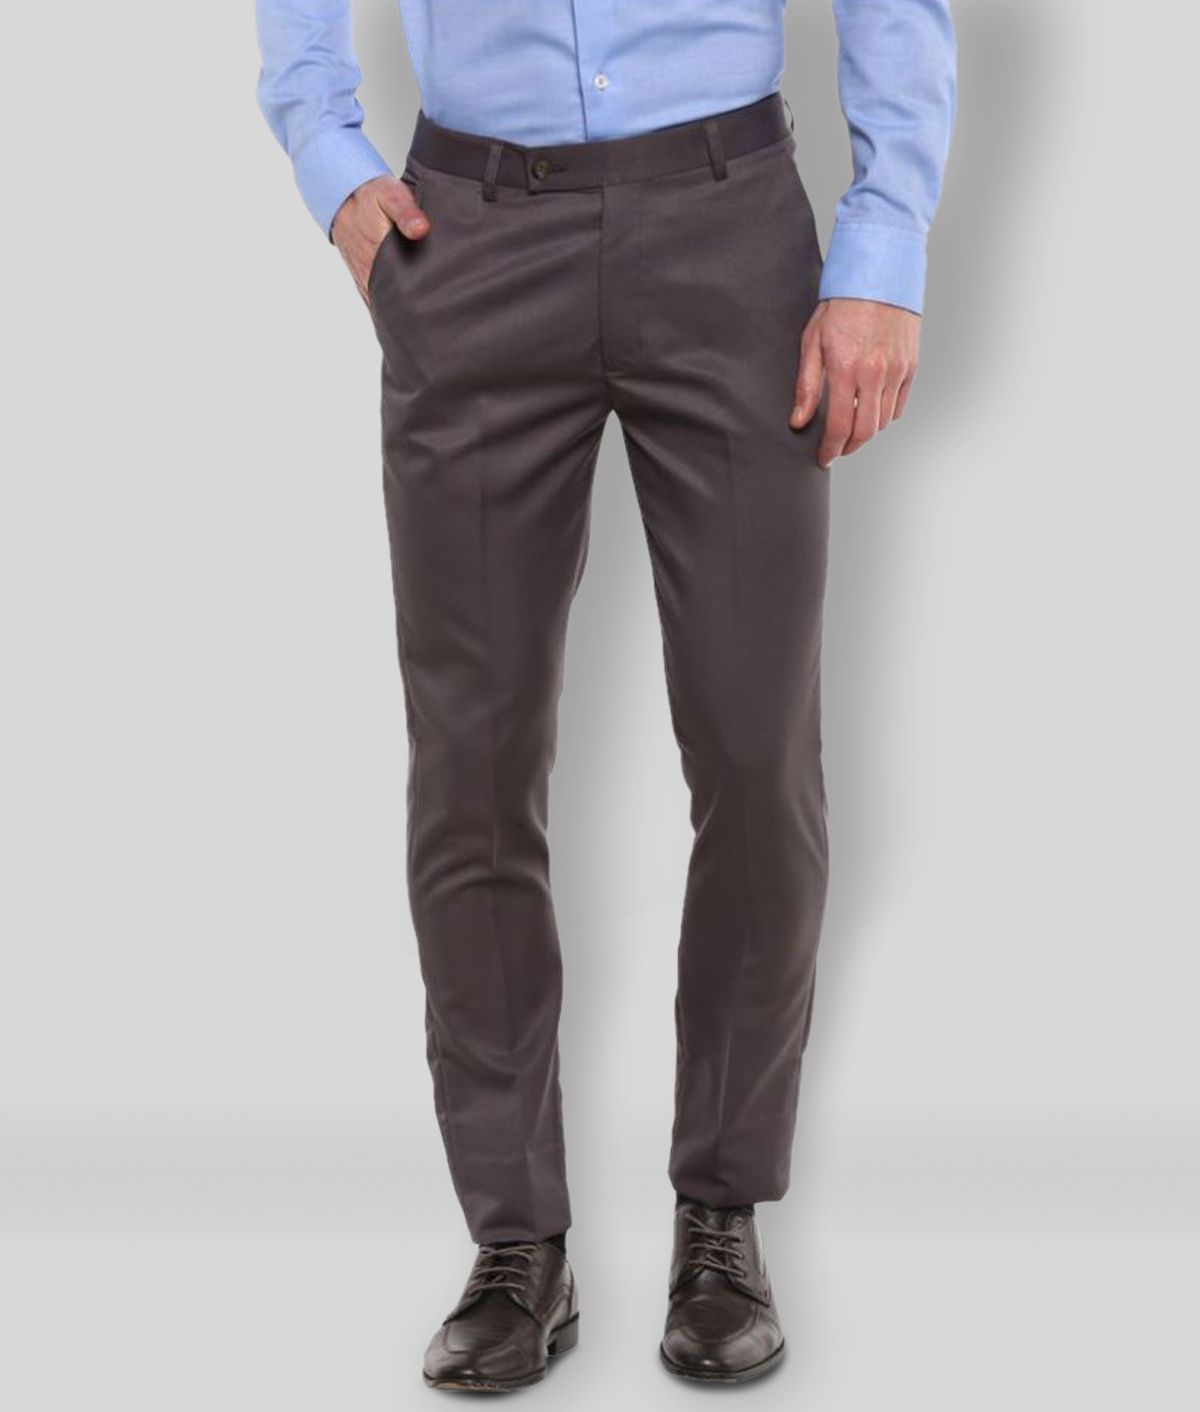     			Inspire Clothing Inspiration - Grey Polycotton Slim - Fit Men's Formal Pants ( Pack of 1 )